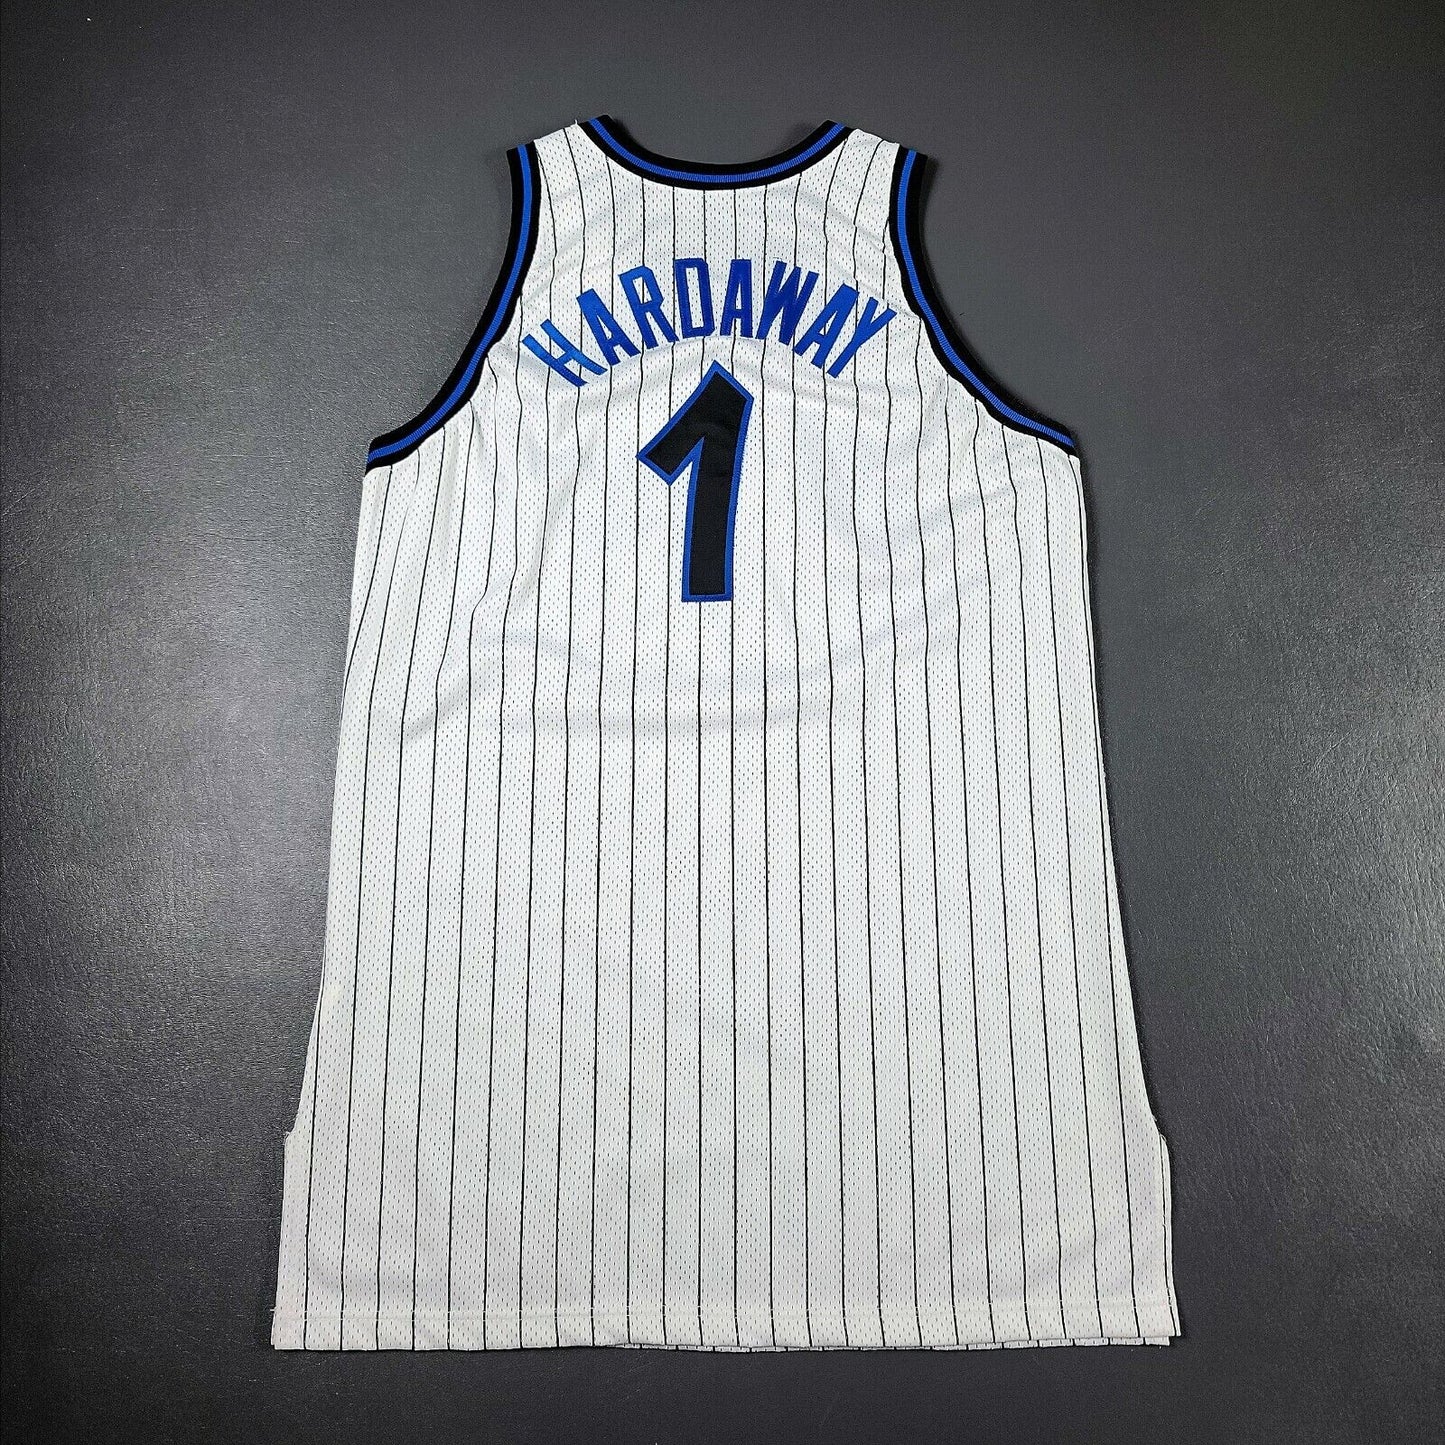 100% Authentic Penny Hardaway Champion 96 97 Magic Game Jersey 50+4" Pro Cut